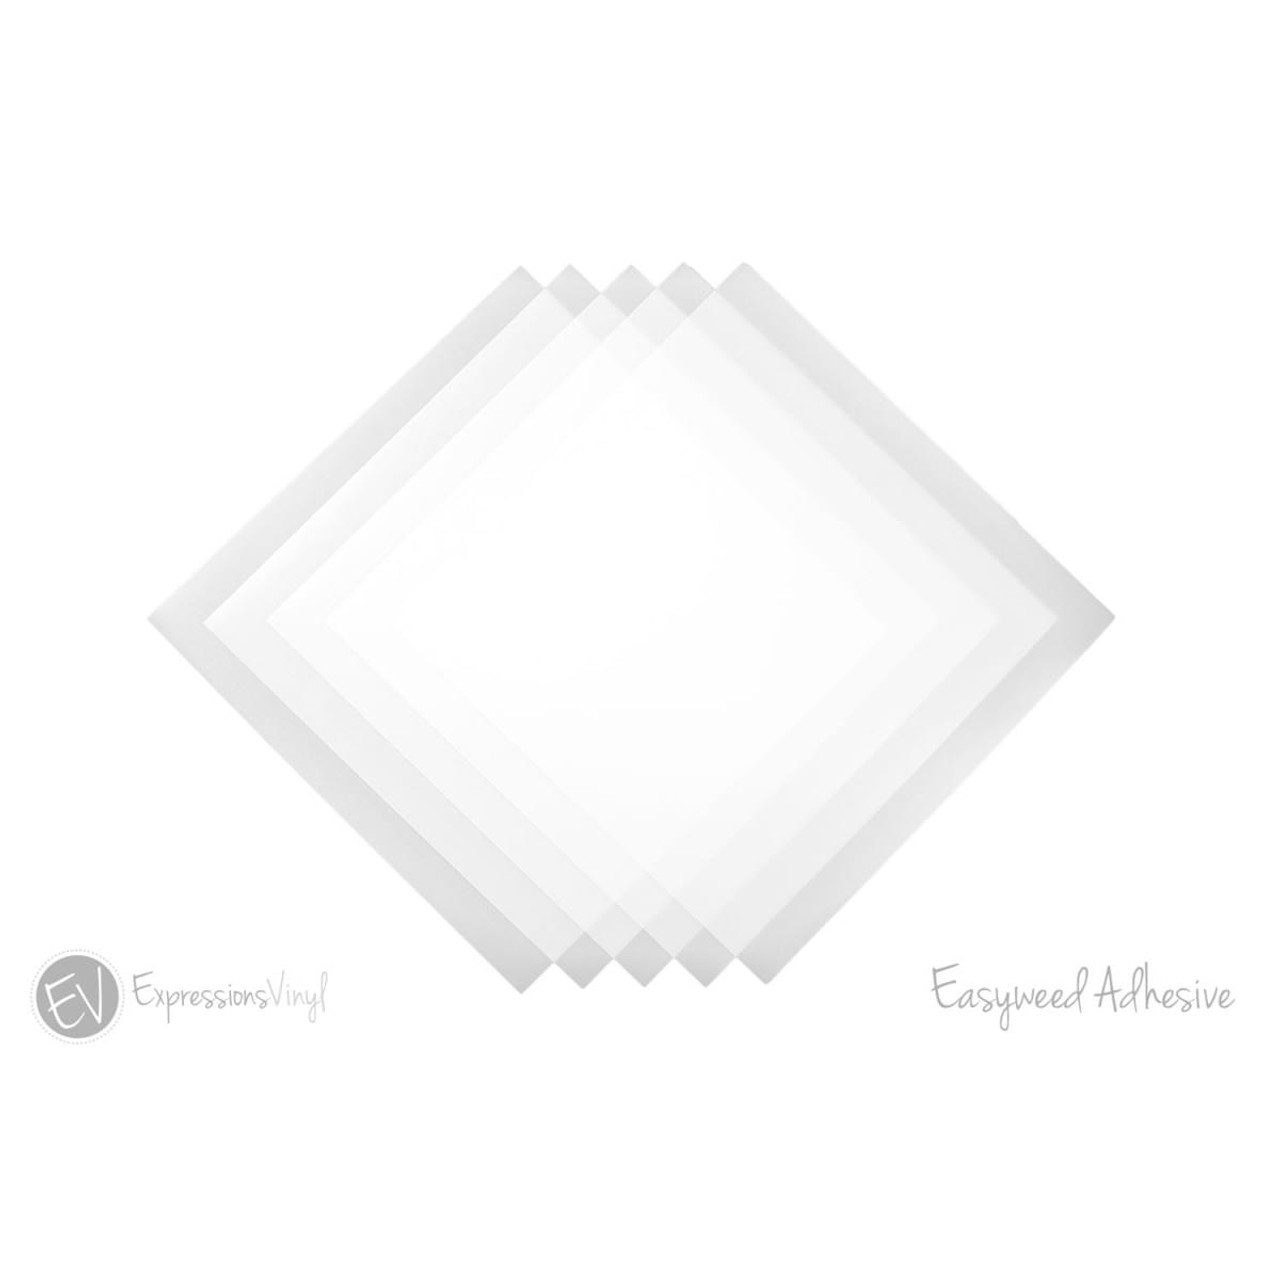 Deco Foil Transfer Sheets (5 Pack) ***For use with EasyWeed Adhesive***